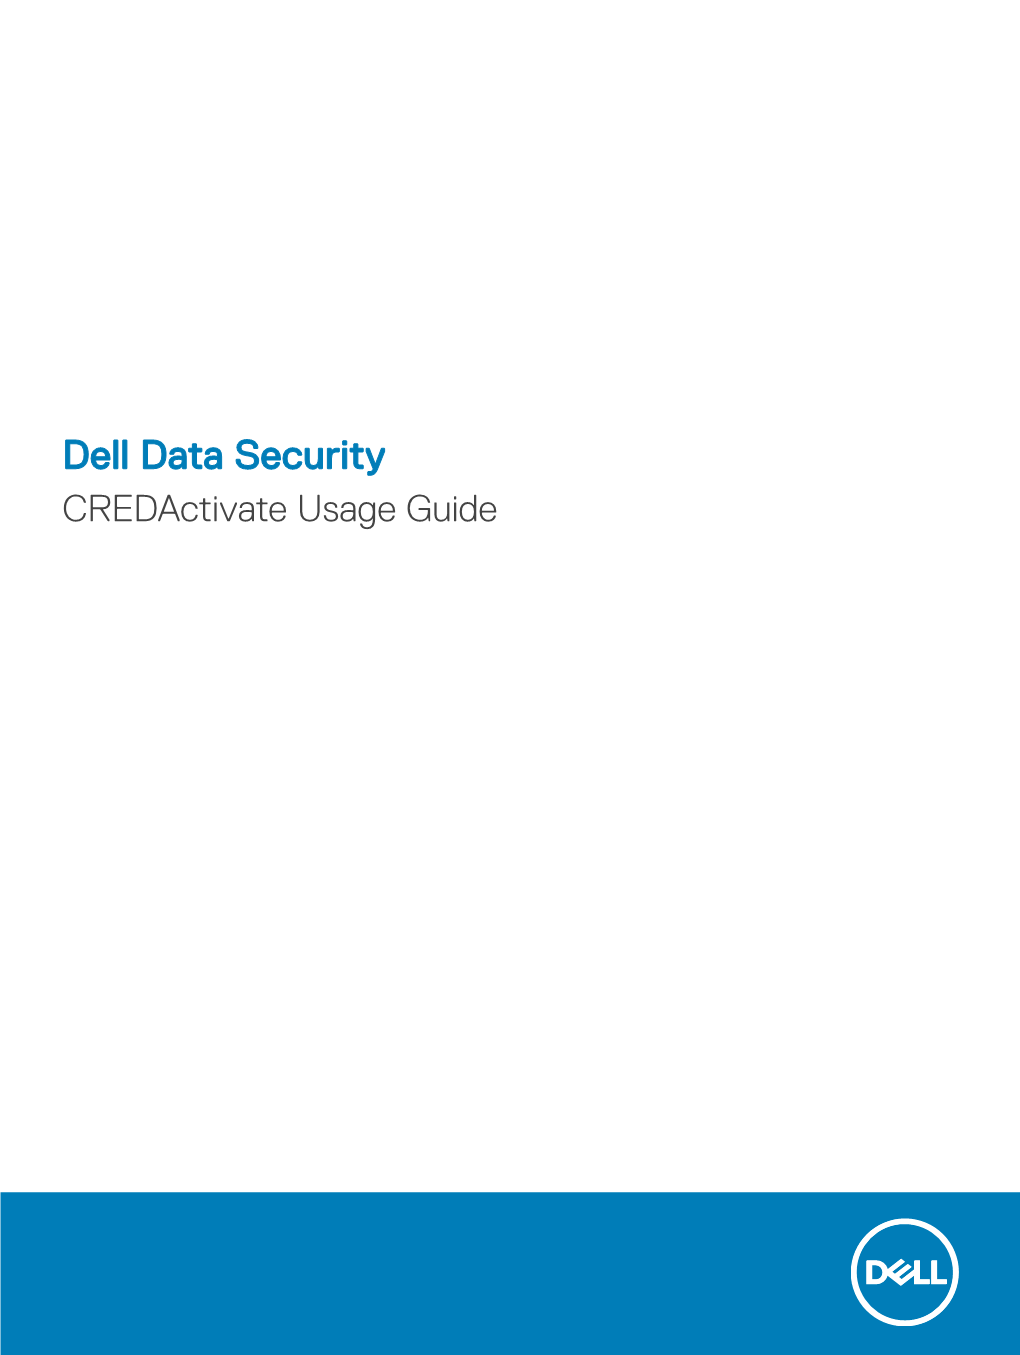 Dell Data Security Credactivate Usage Guide Notes, Cautions, and Warnings